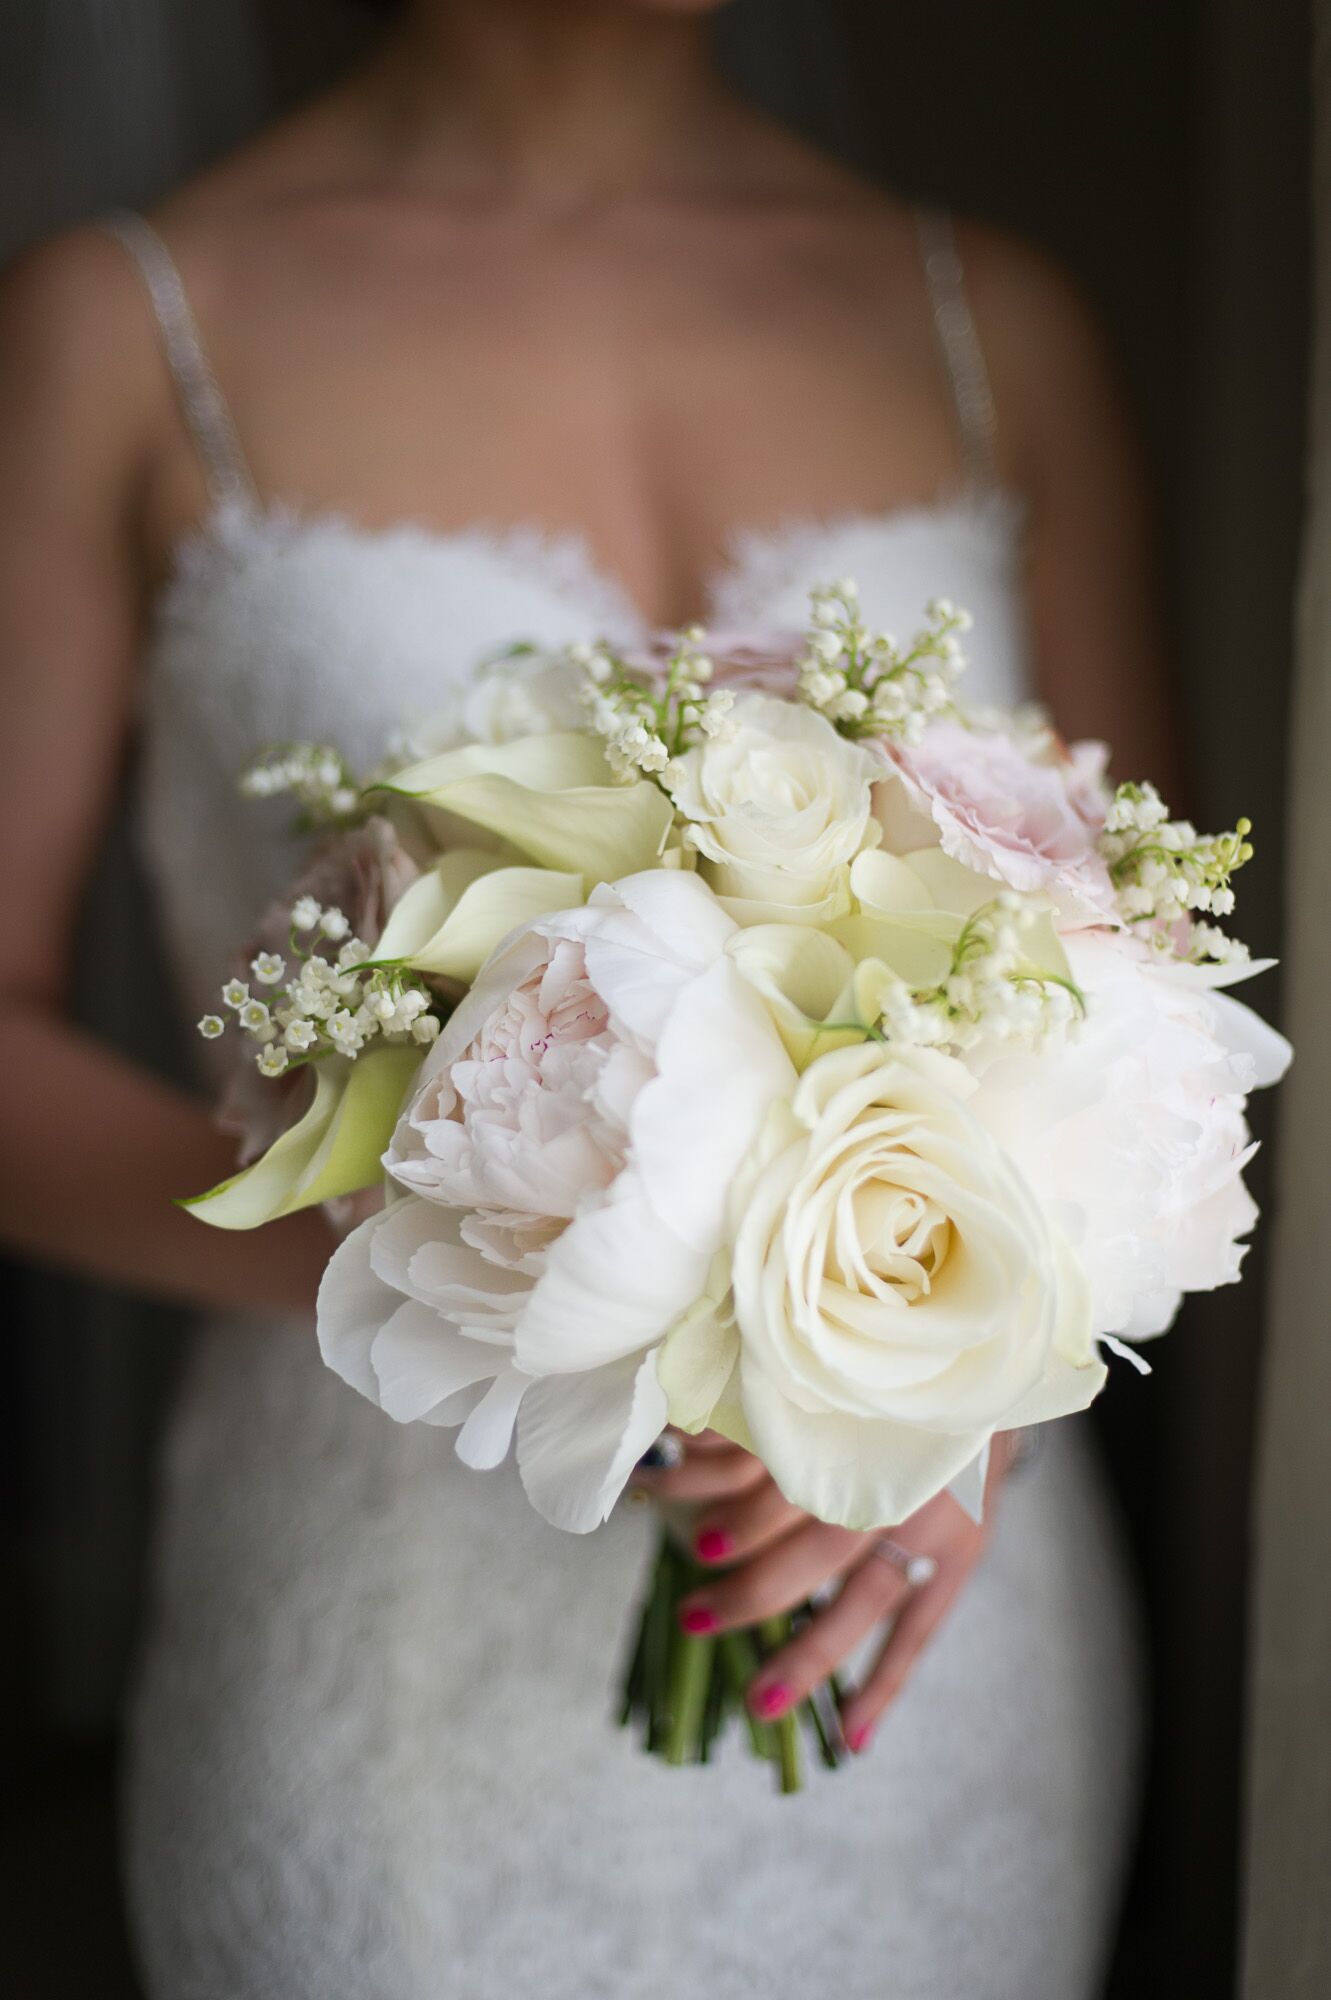 Simple Bouquet With Peonies, Roses and Calla Lilies